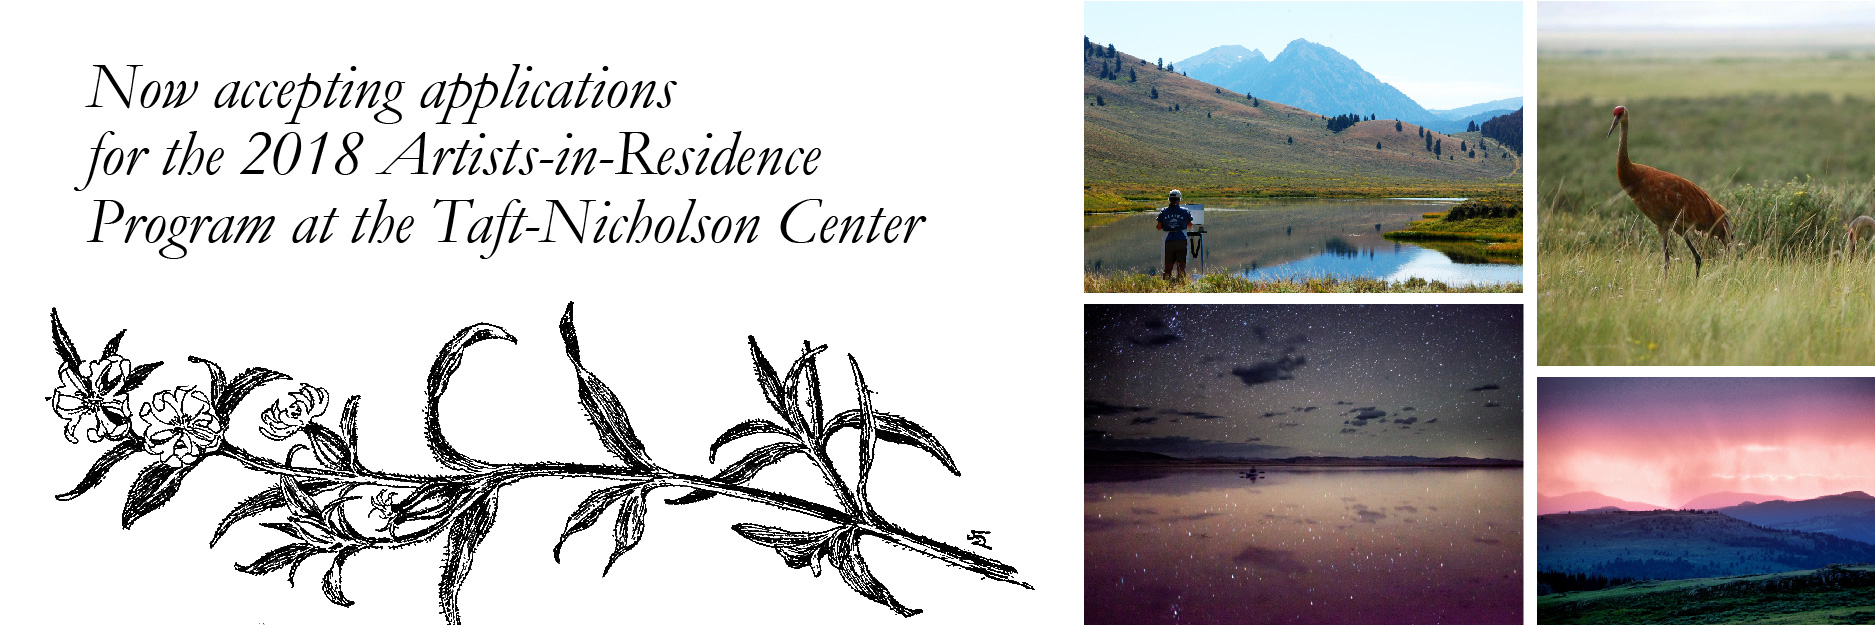 Now Accepting Applications for the 2018 Artists-in-Residence Program